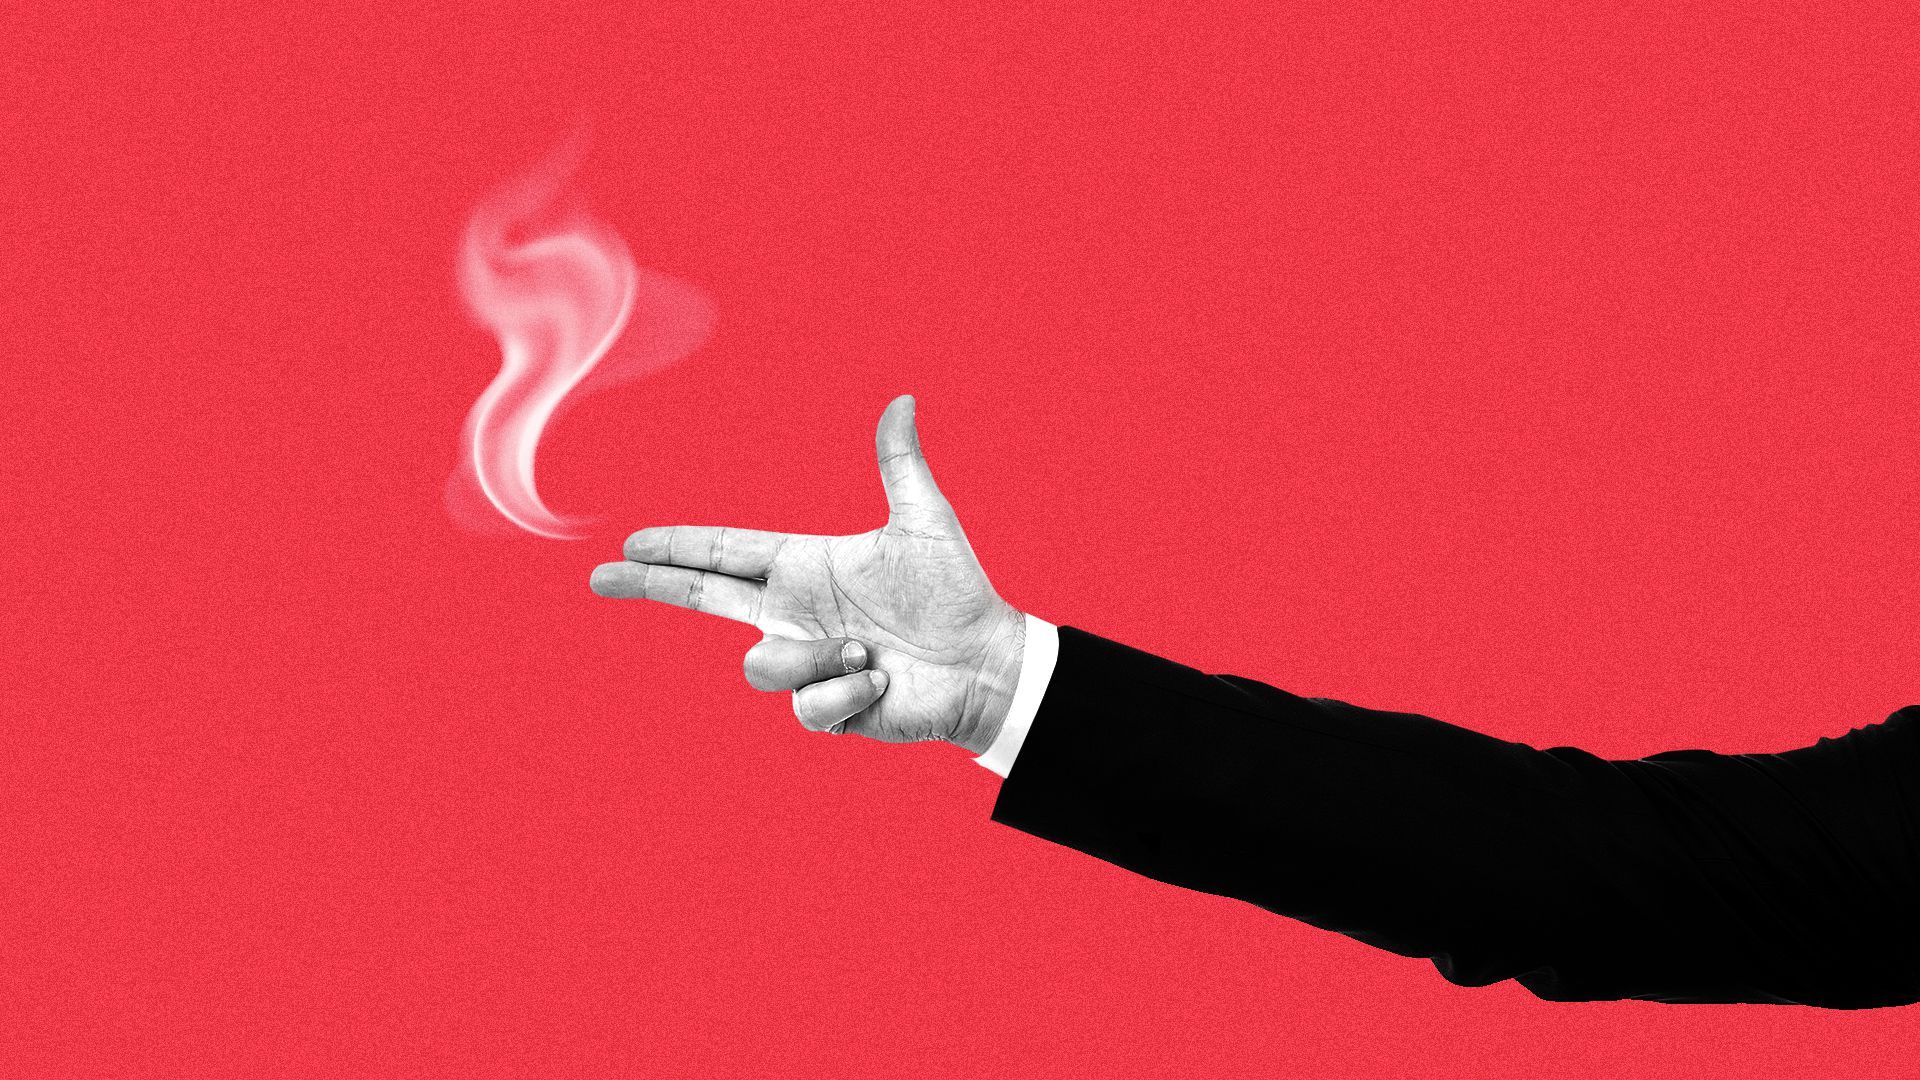 Illustration of an arm in a business suit making a gun sign with smoke coming out of the fingertips.